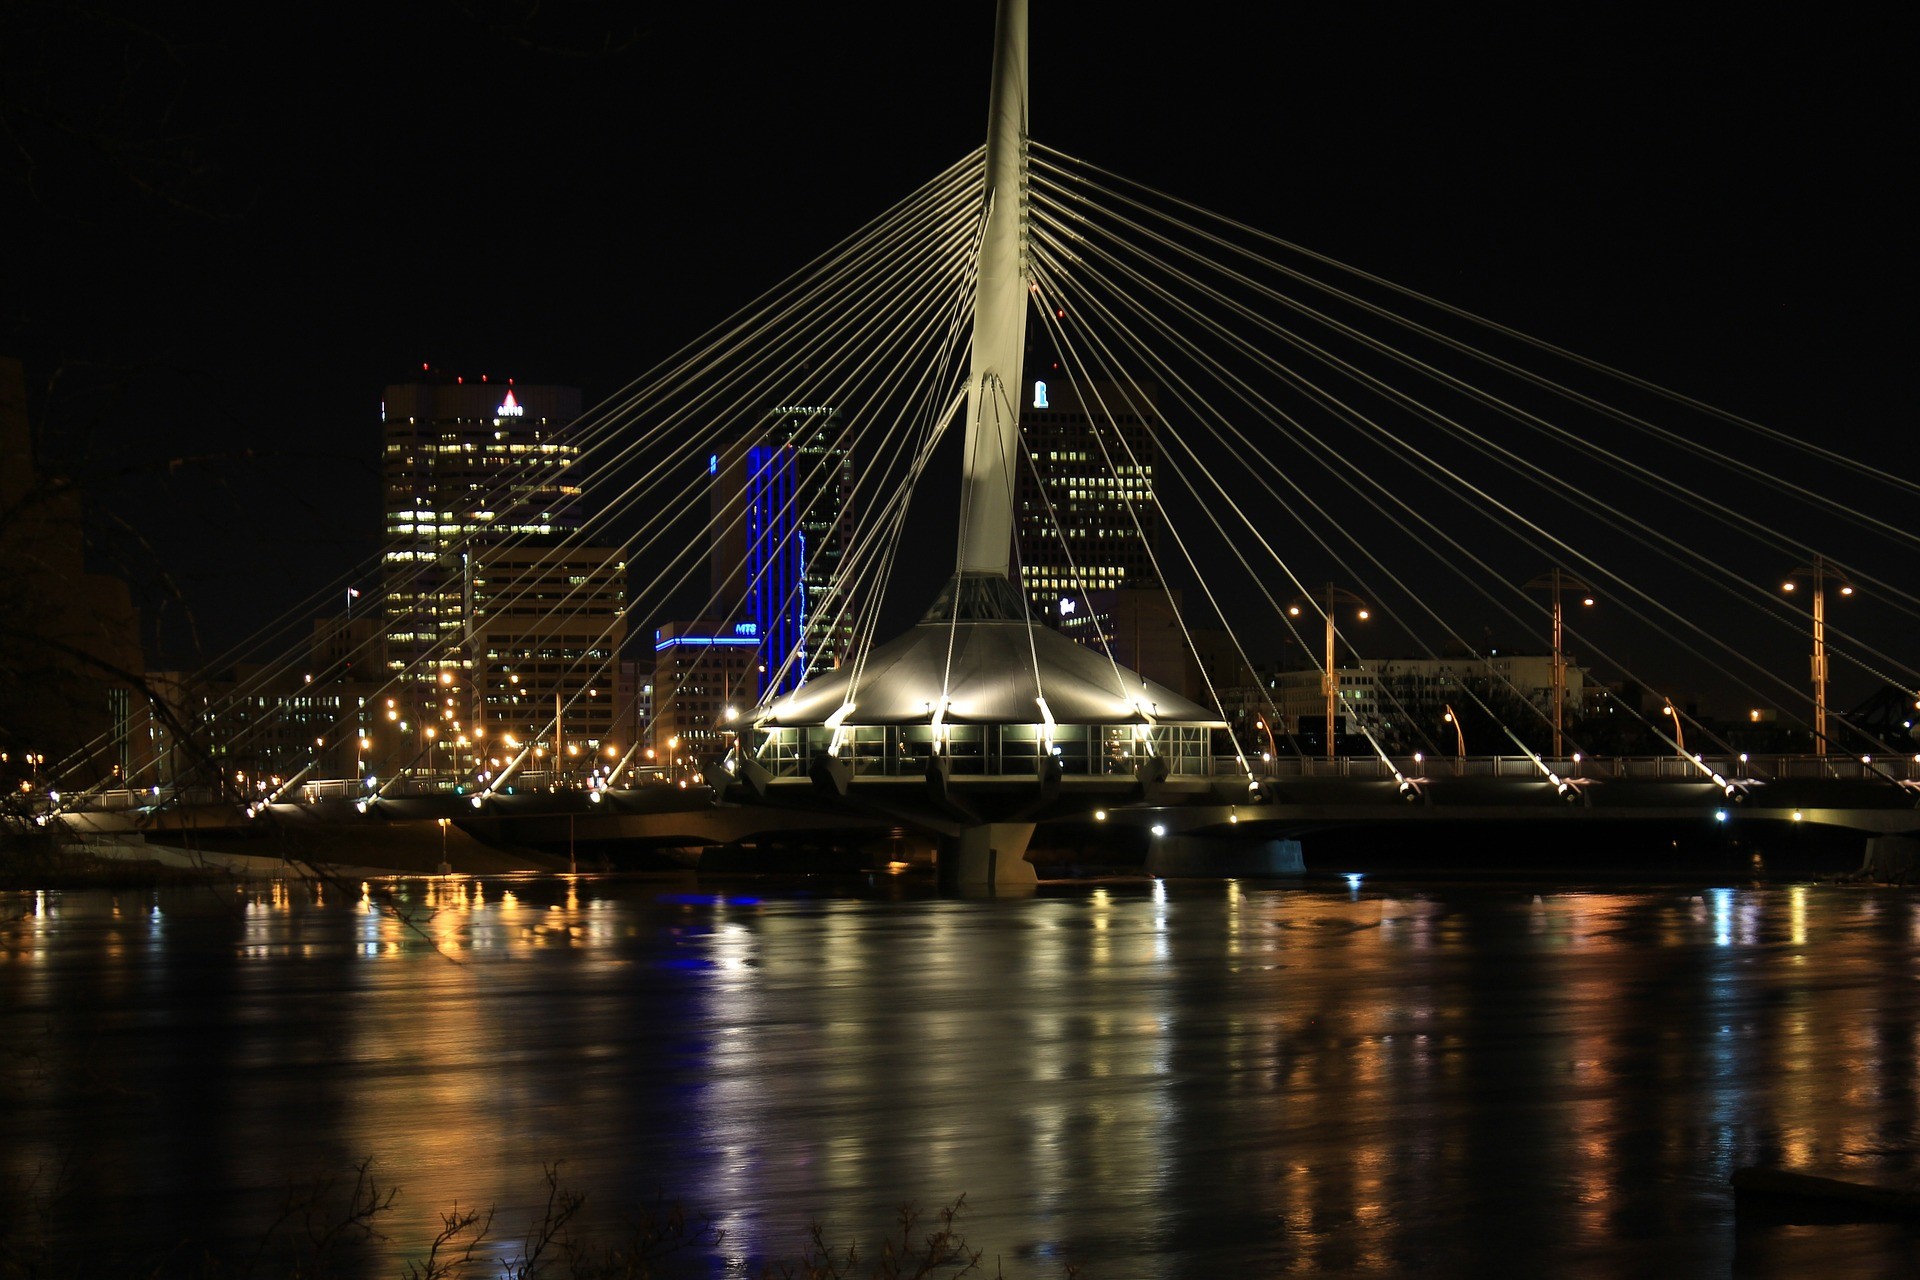 A view of the Provencher Bridge and Winnipeg skyline at night